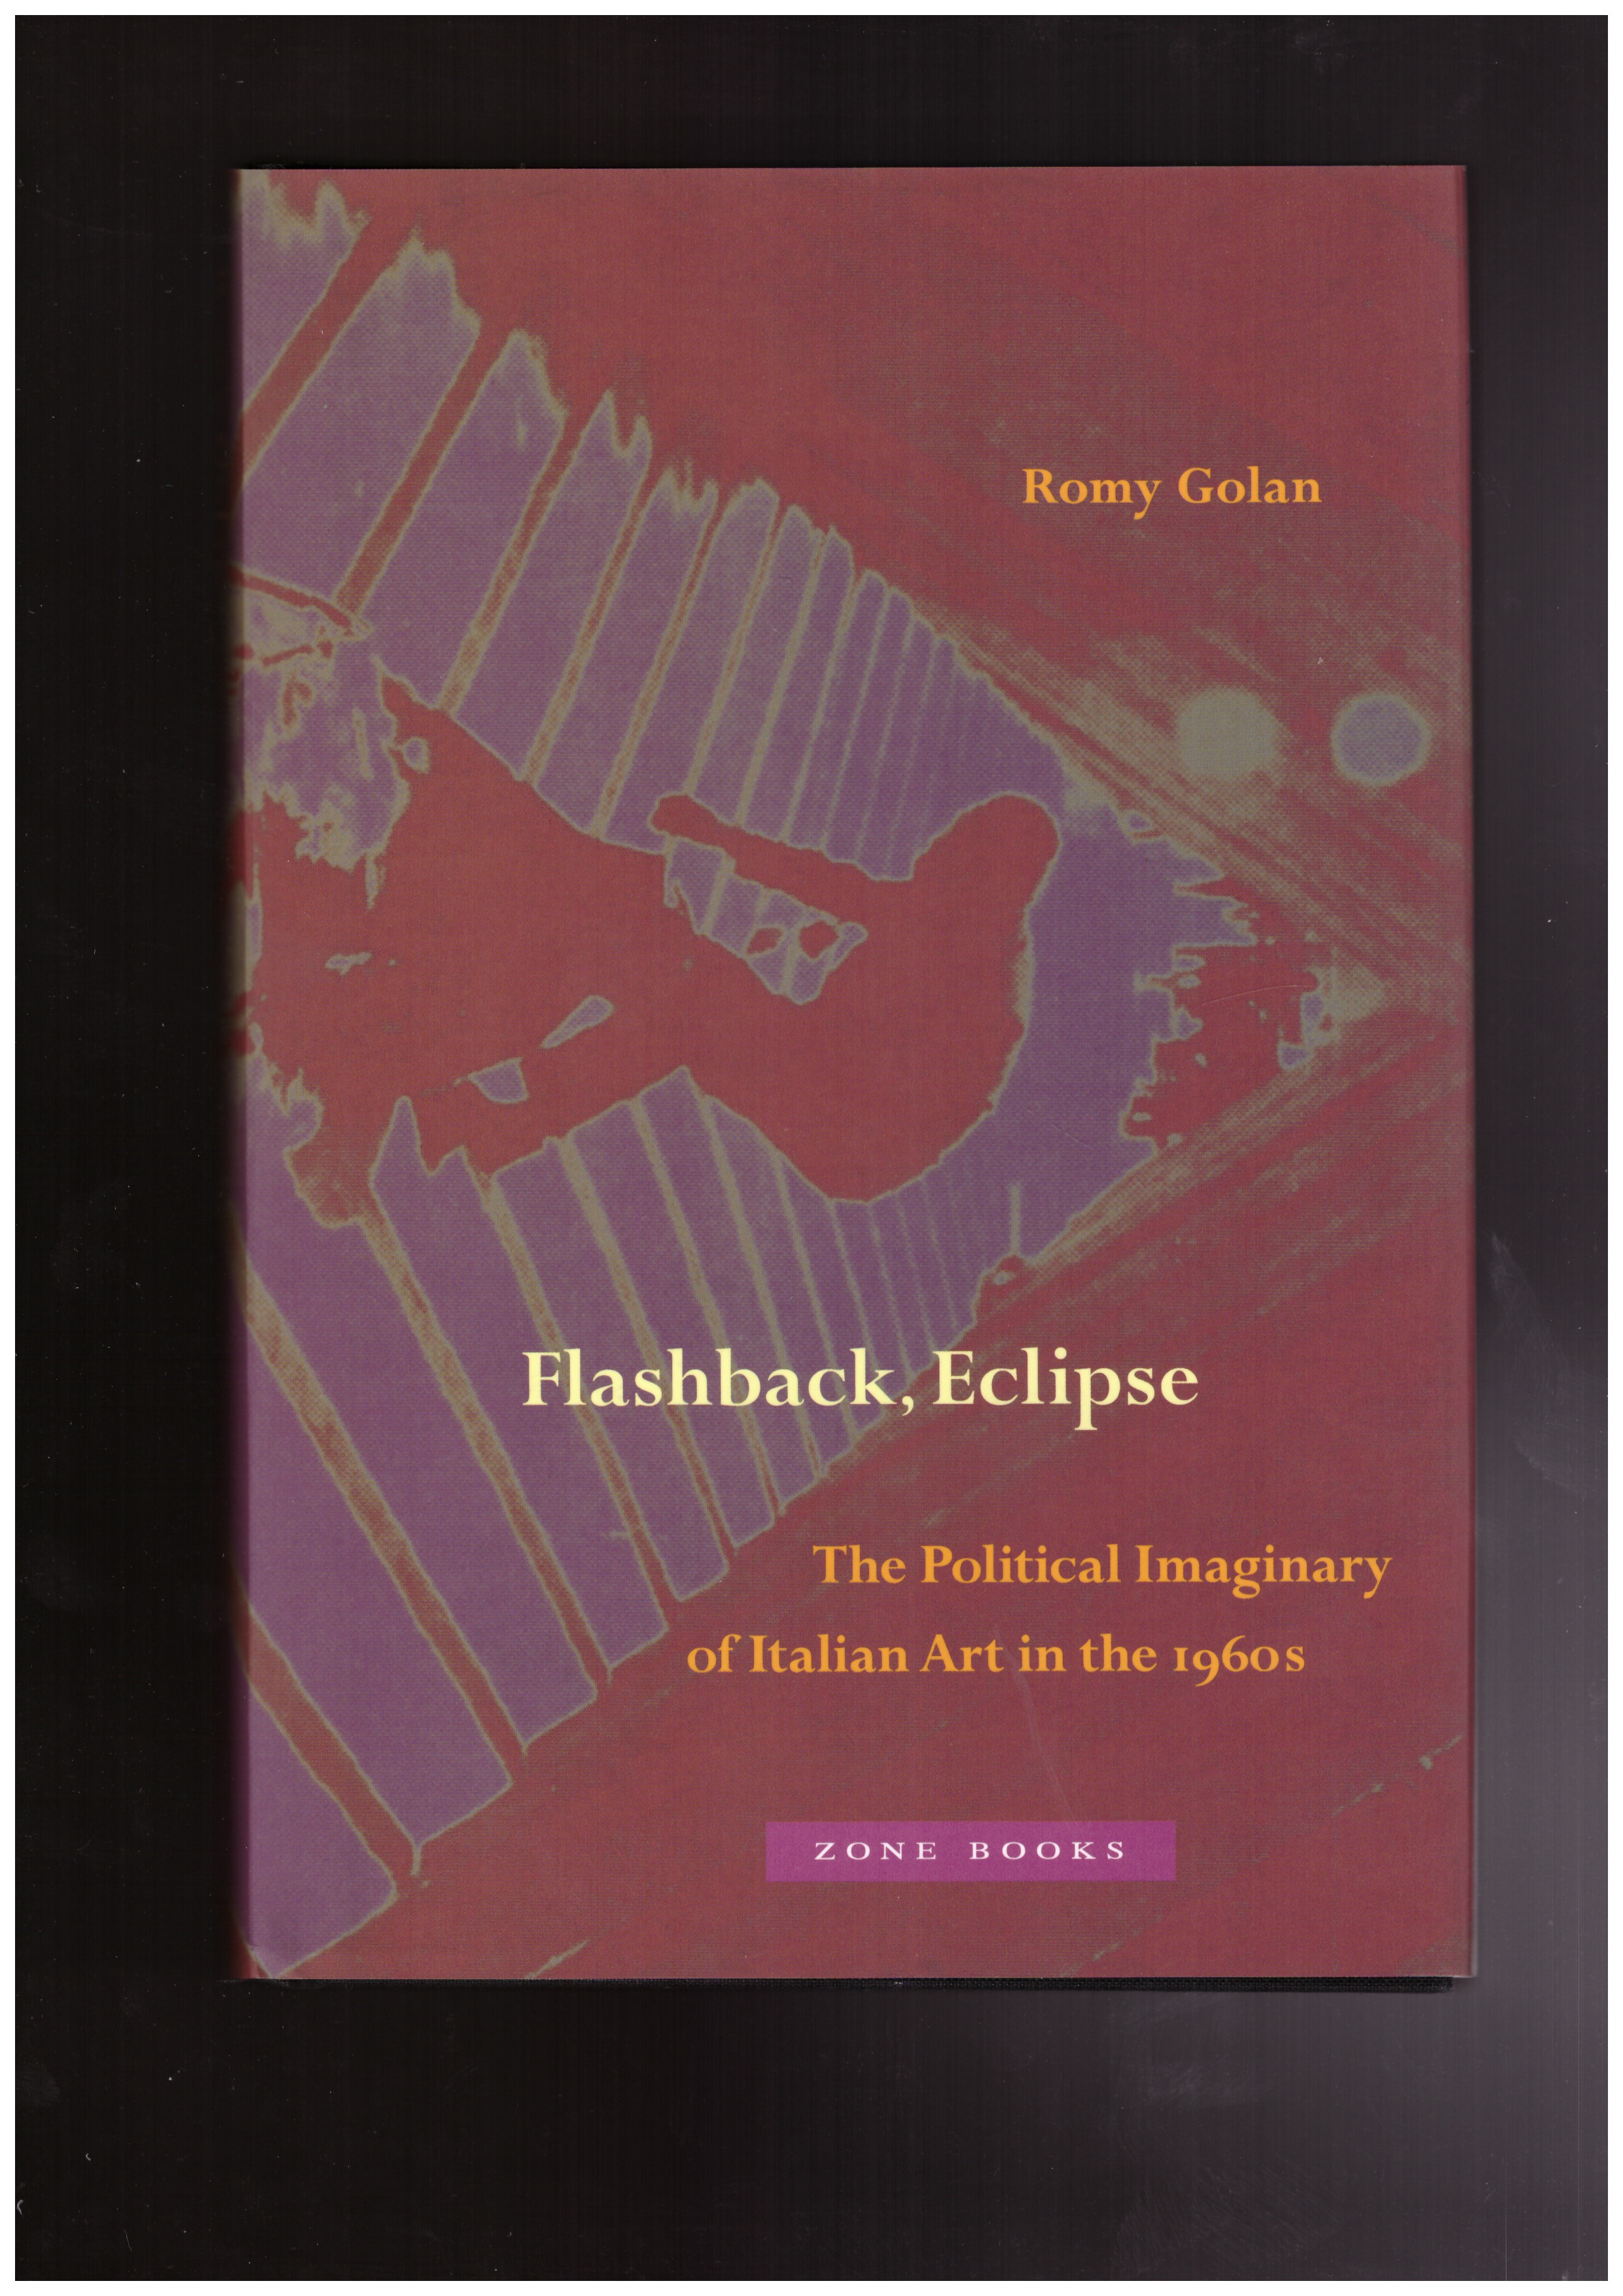 GOLAN, Romy - Flashback, Eclipse: The Political Imaginary of Italian Art in the 1960s